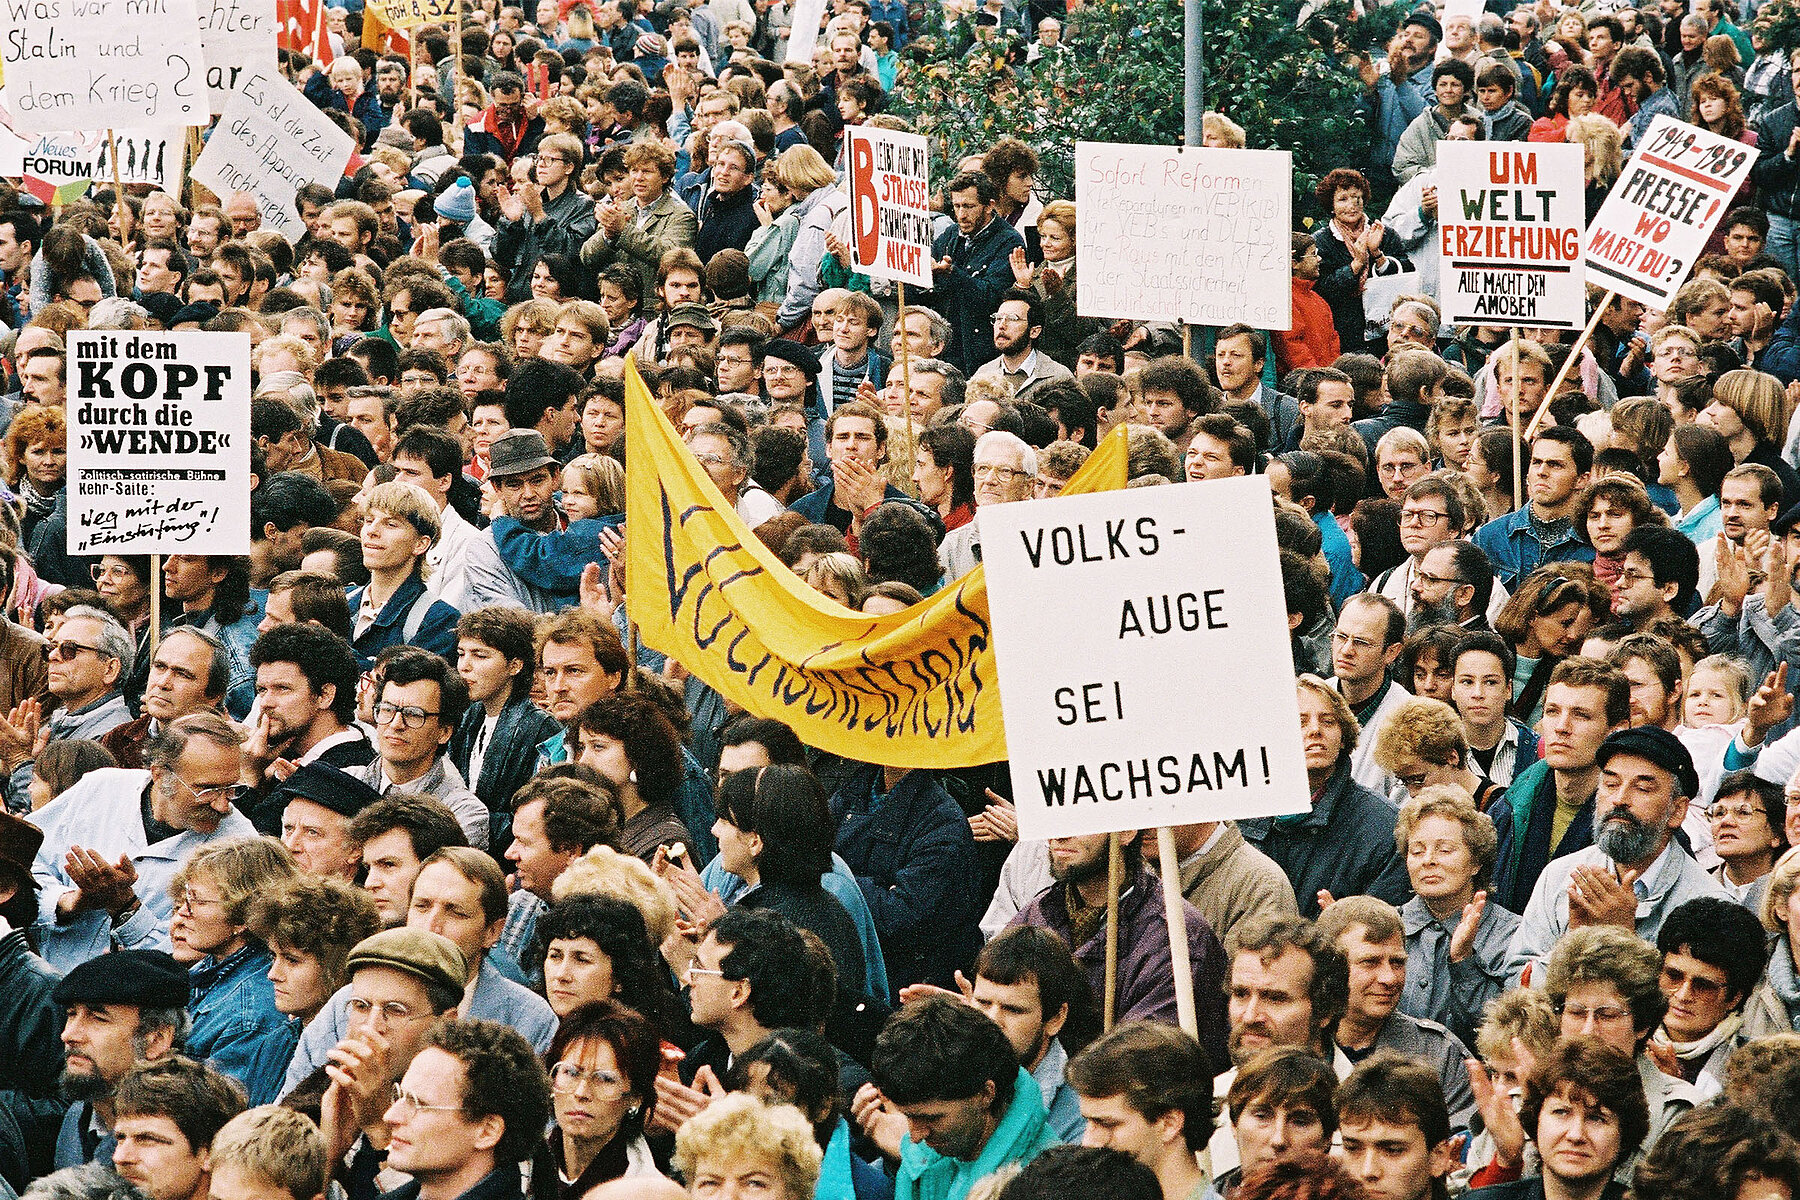 A large crowd of demonstrators on Alexanderplatz, some carry signs. A sign in the foreground reads People's eye, be vigilant.